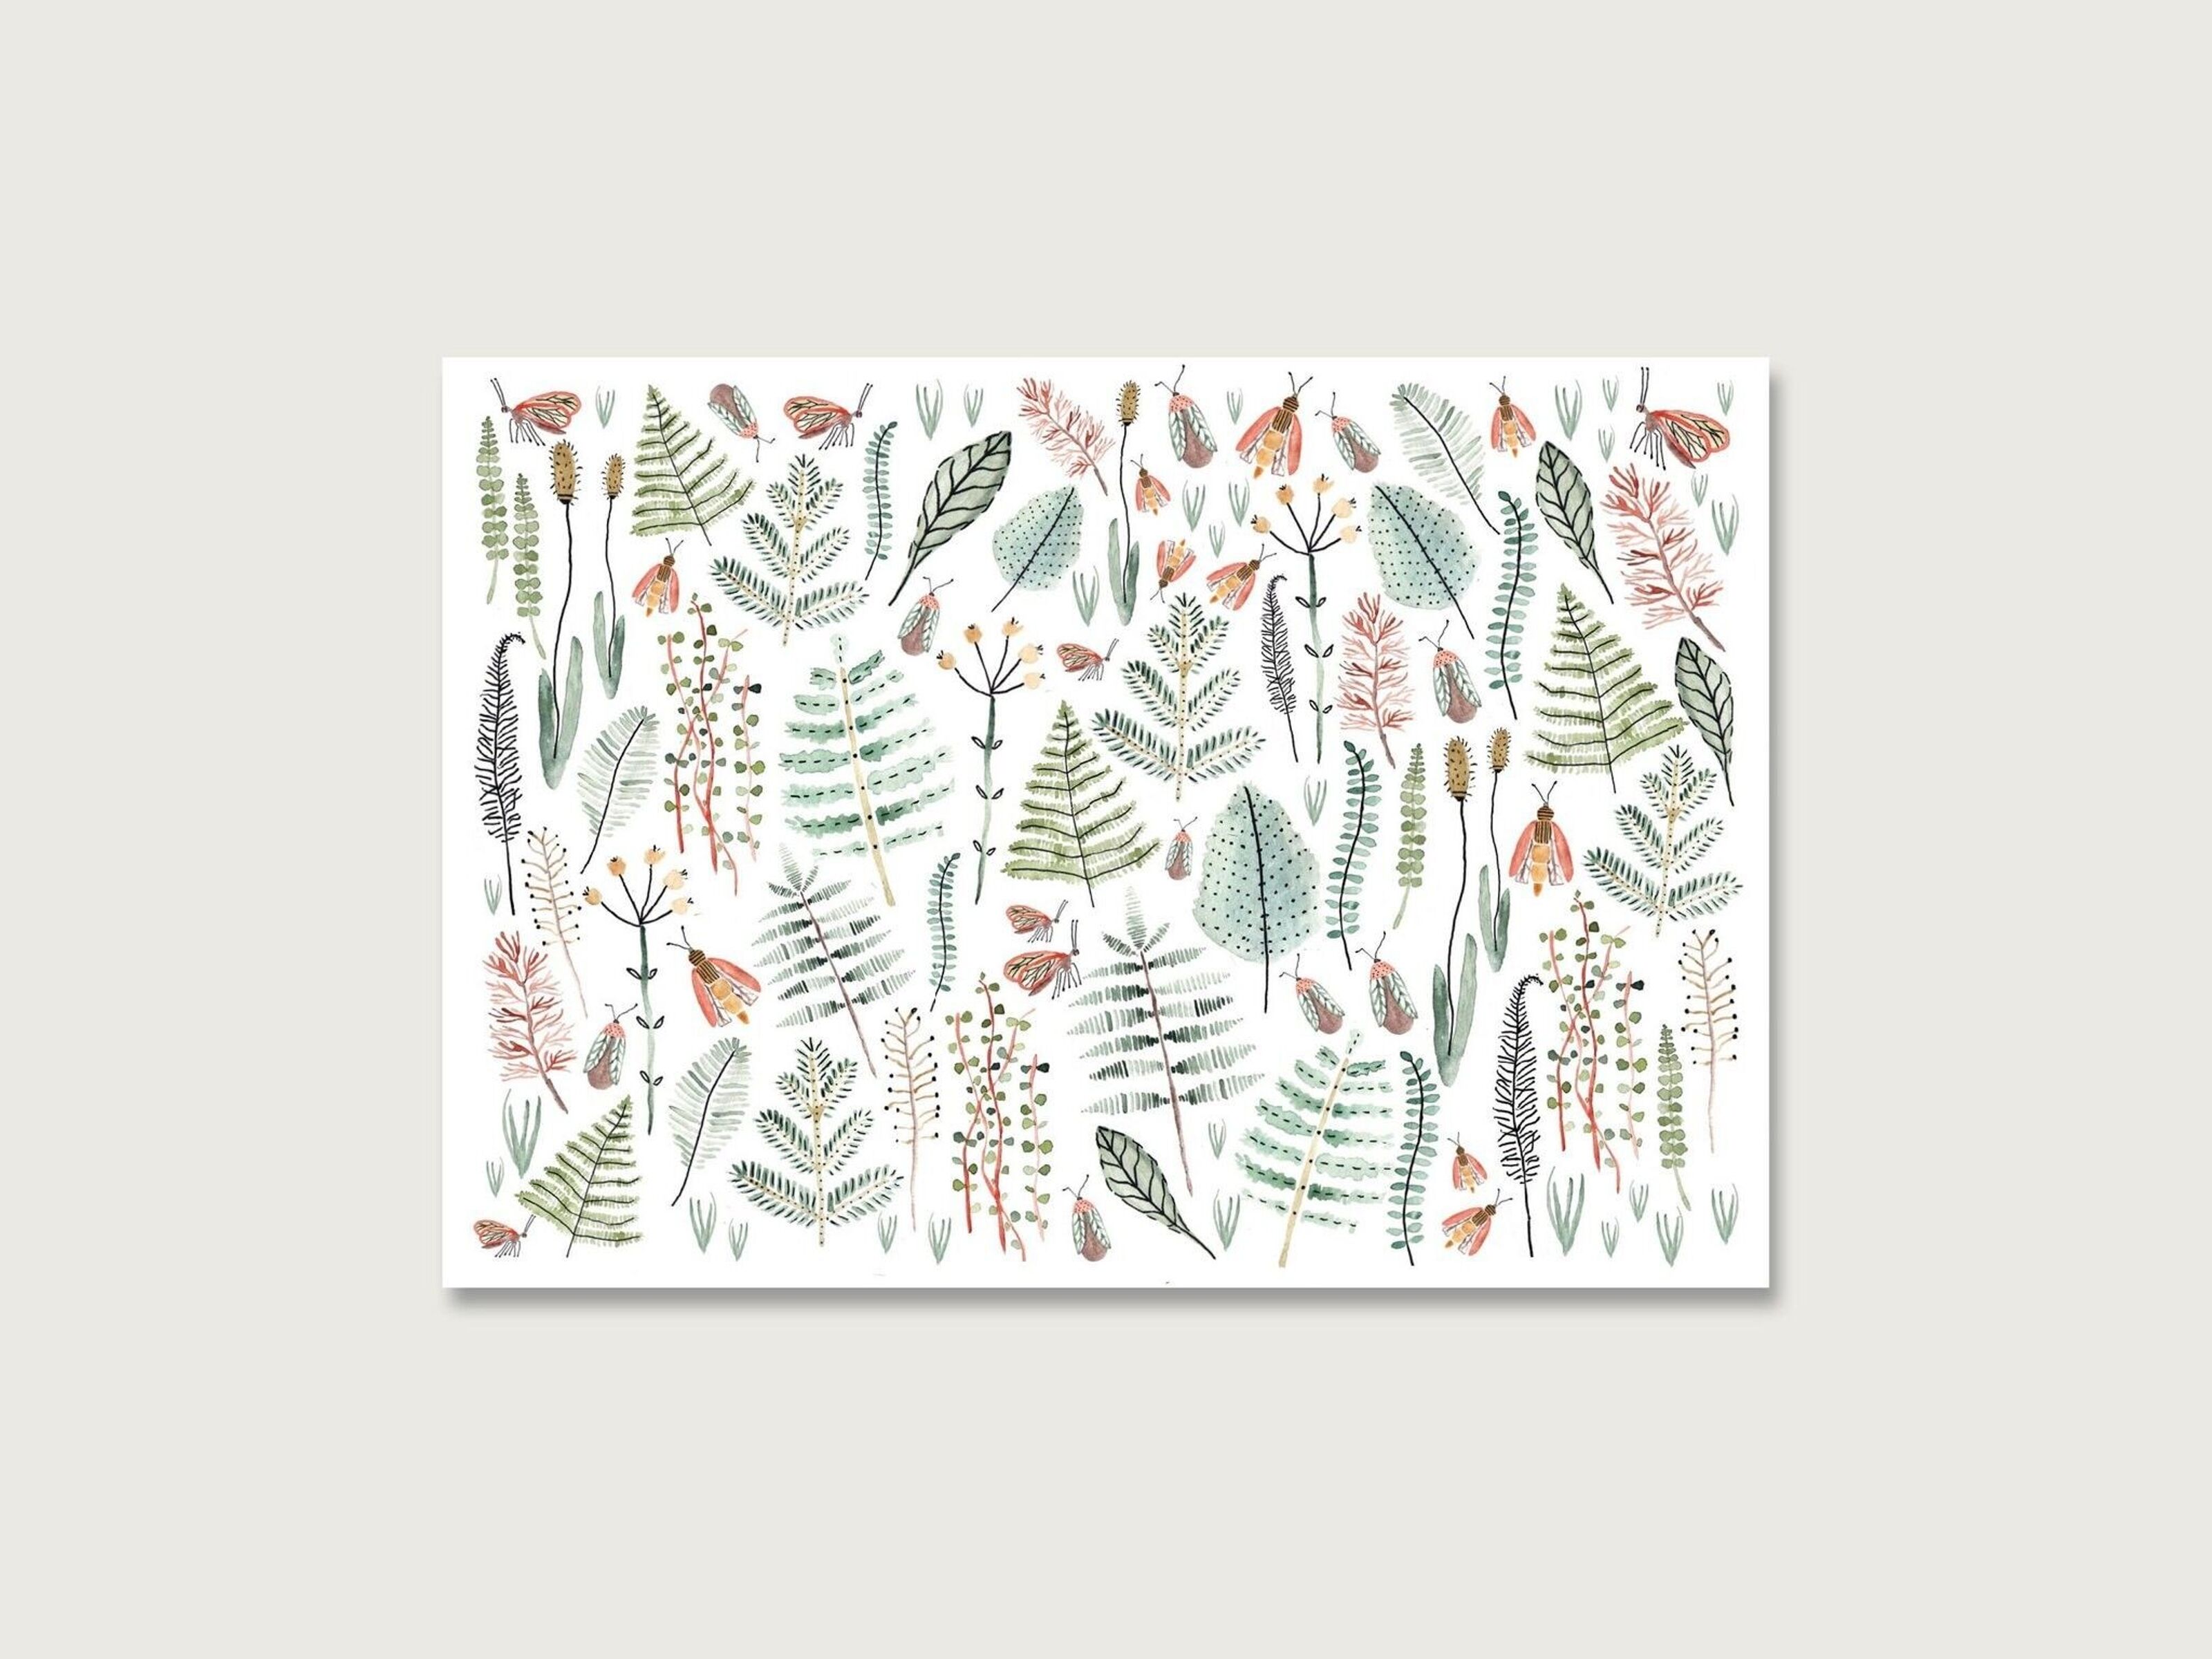 | | grasses Postcard fern watercolor | Leaves | | wholesale Buy Collage | Nature Illustration Watercolor | |